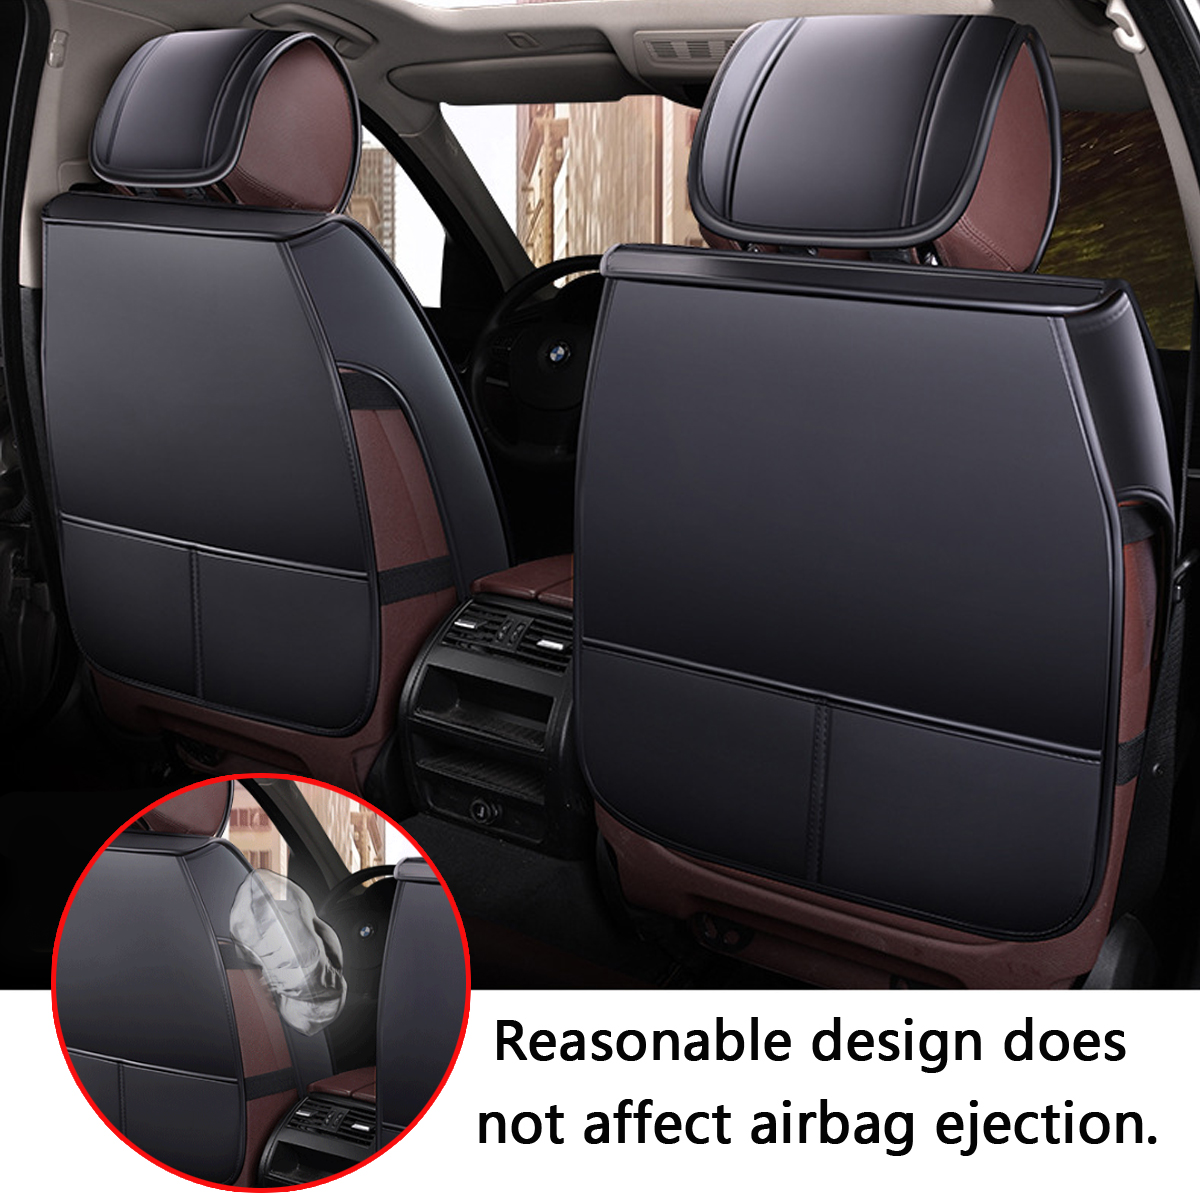 13Pcs-PU-Leather-Car-Full-Surround-Seat-Cover-Cushion-Protector-Set-Universal-for-5-Seats-Car-1327845